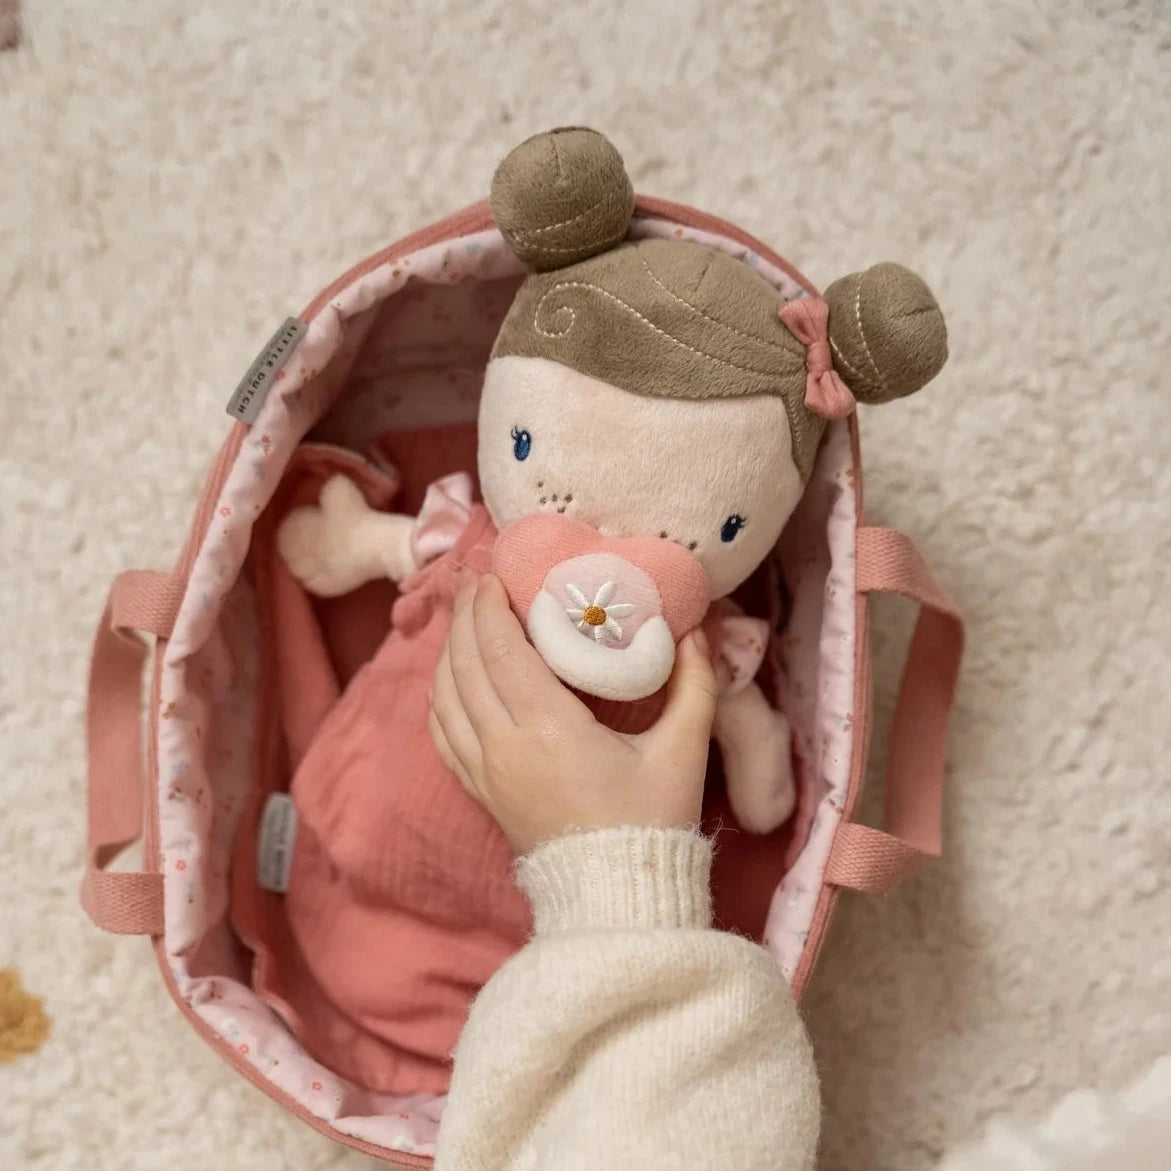 The Little Dutch Baby Rosa doll has lots of play value with a magnetic dummy